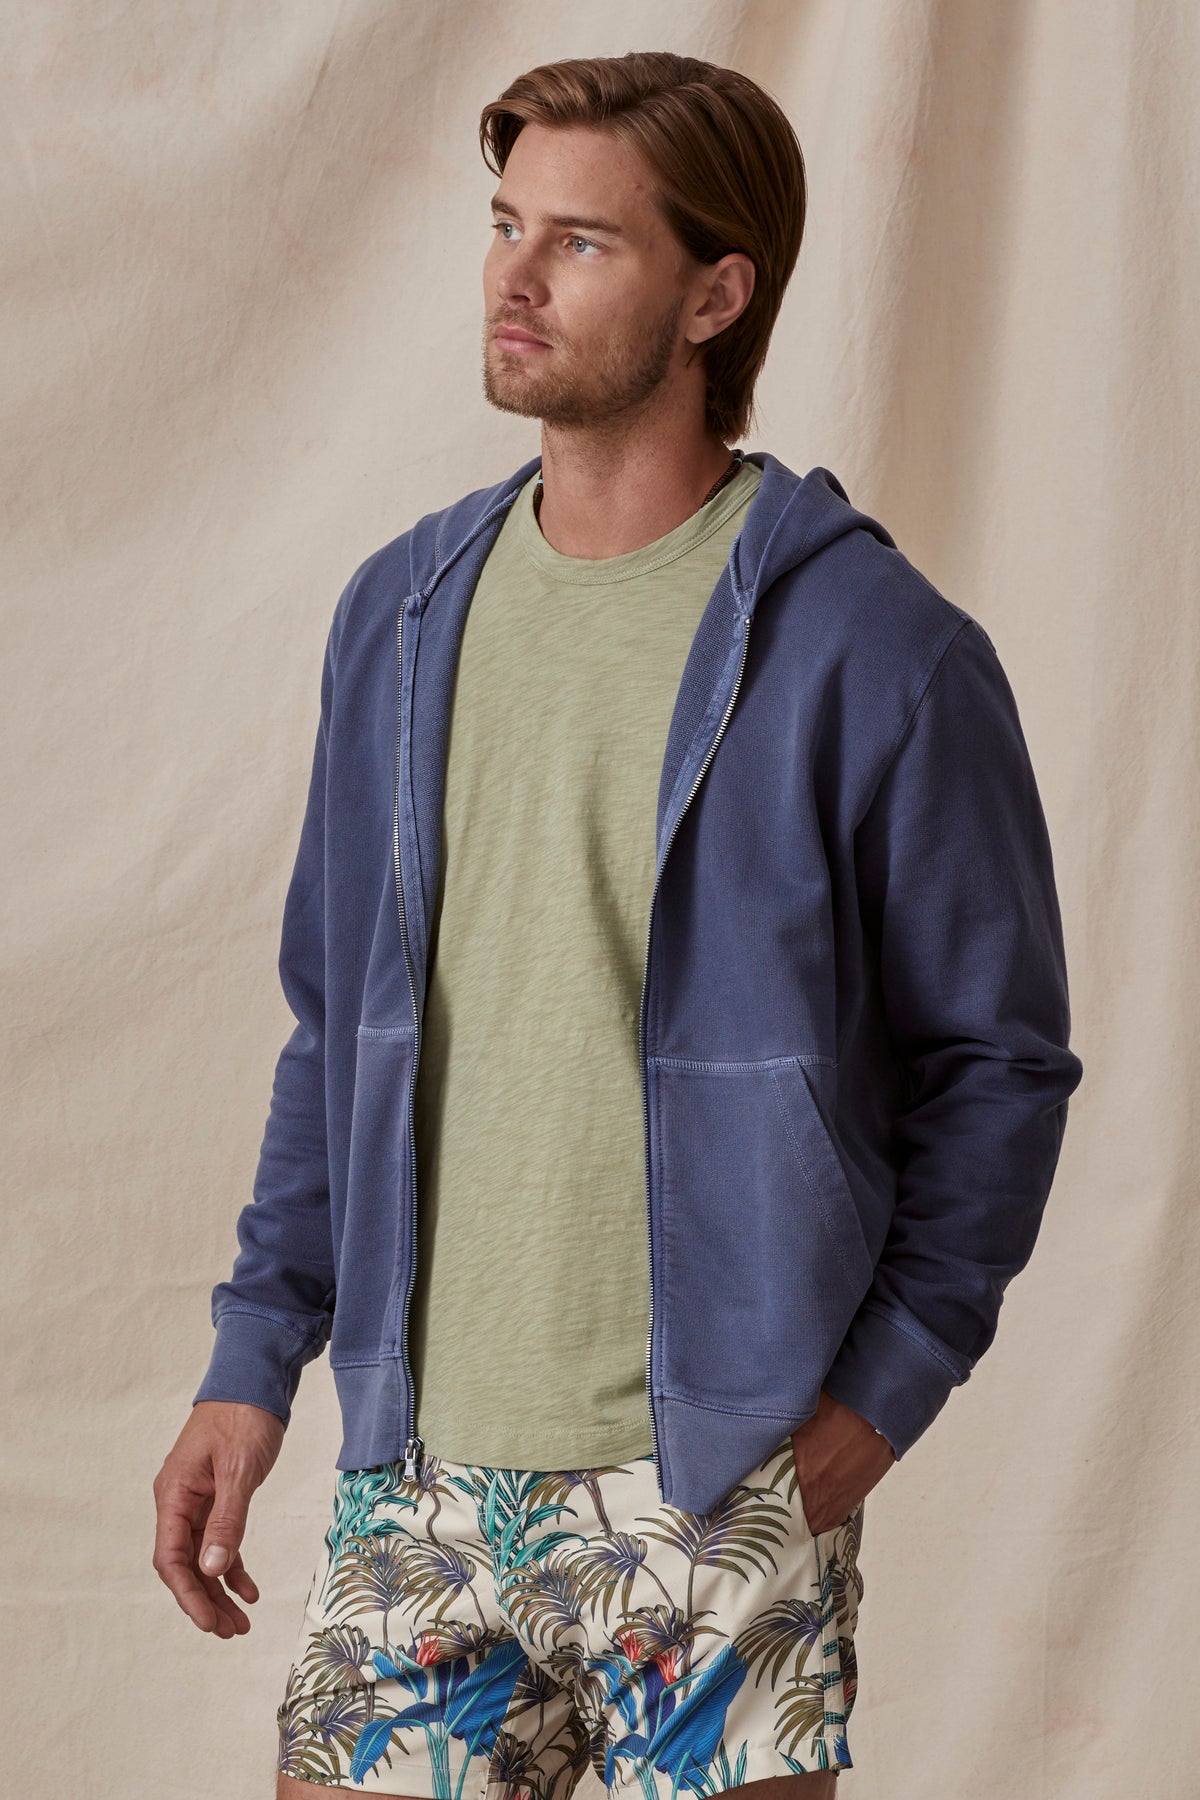 Man in a casual outfit featuring a Velvet by Graham & Spencer VINCENT HOODIE, green t-shirt, and tropical print shorts, standing against a beige backdrop.-36732533113025